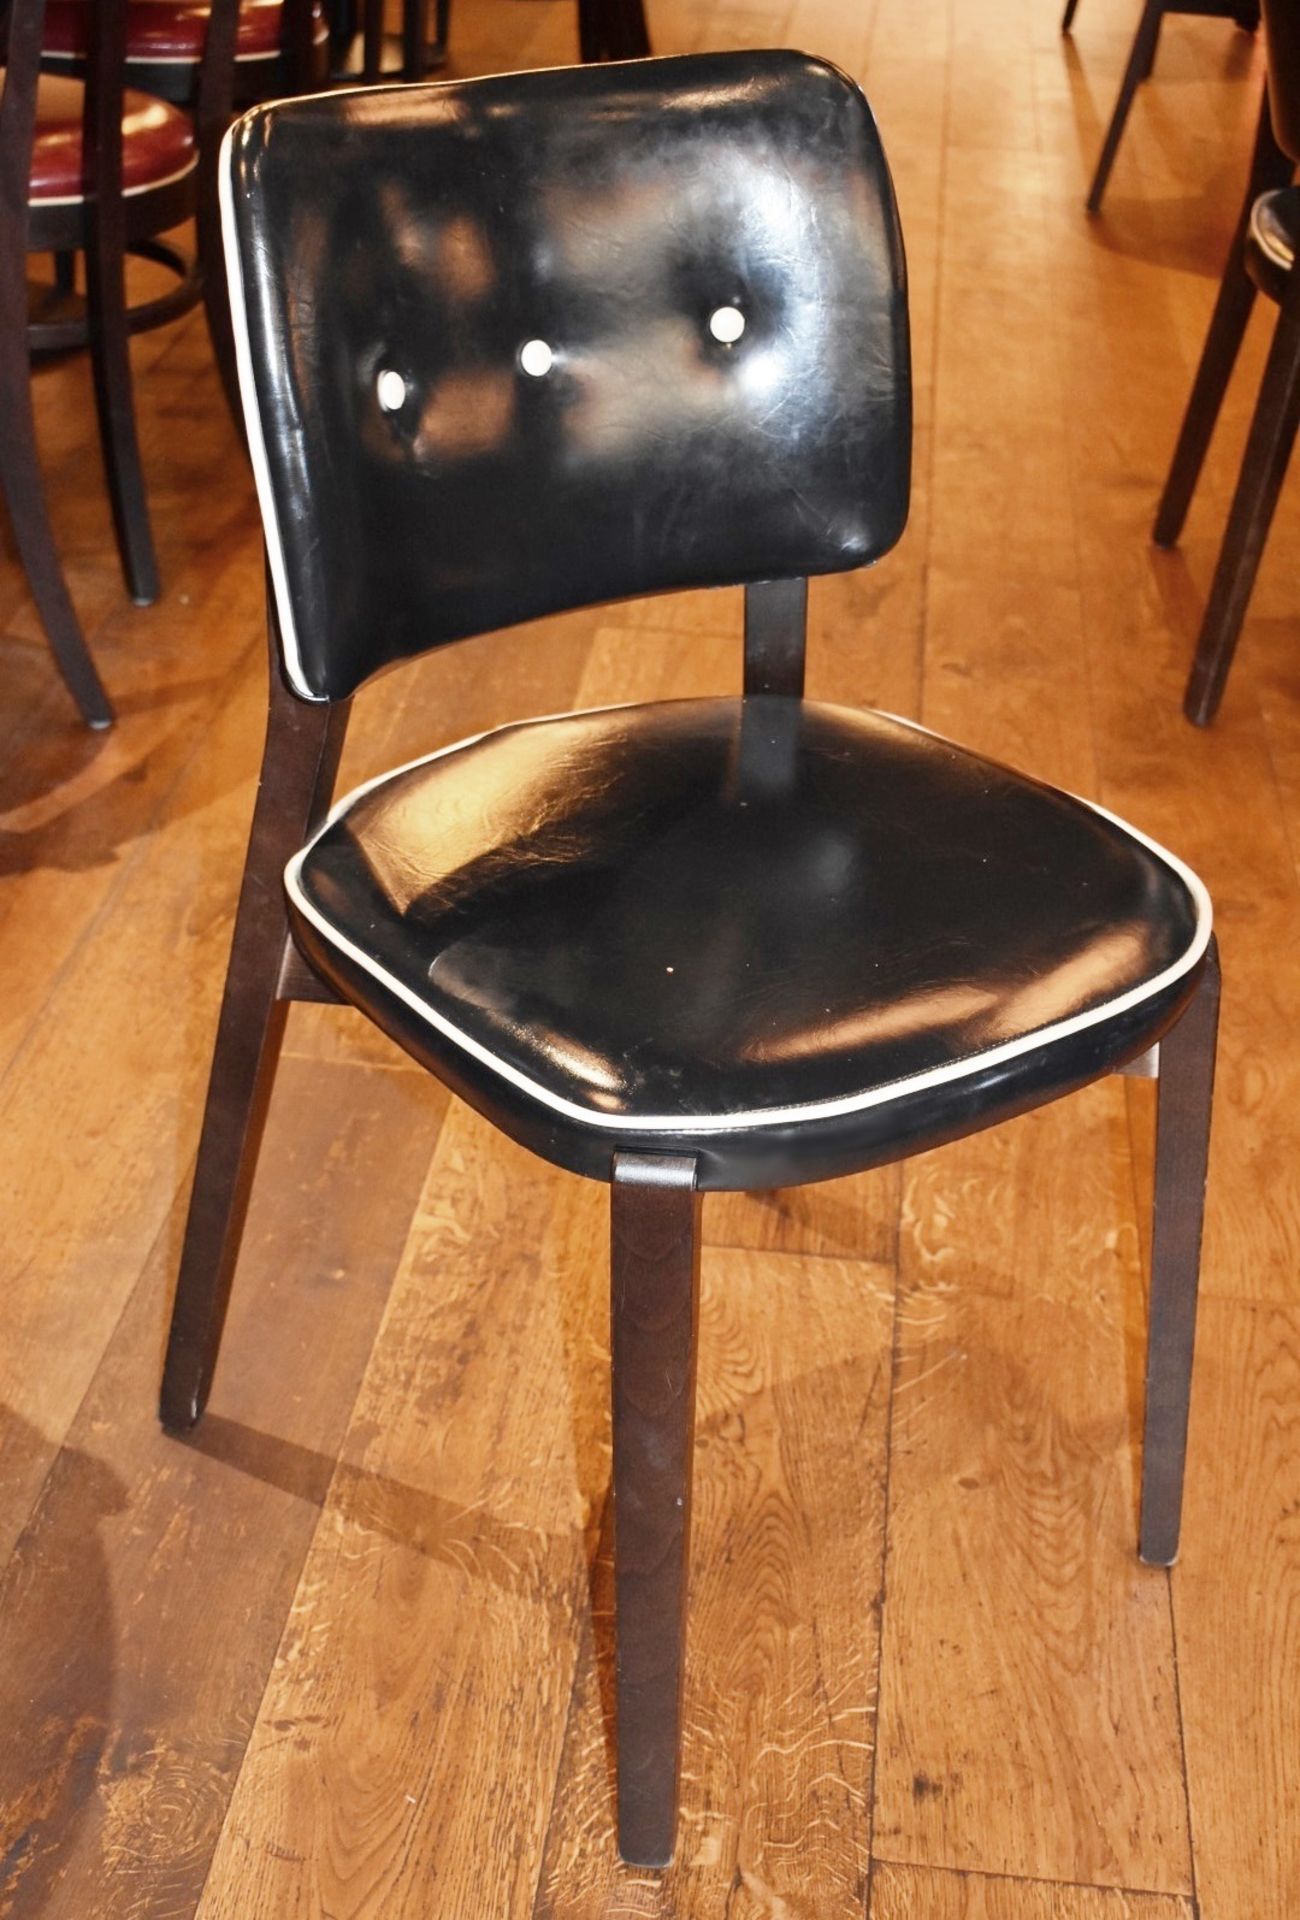 8 x Black Faux Leather Dining Chairs From Italian American Restaurant - Retro Design With Dark